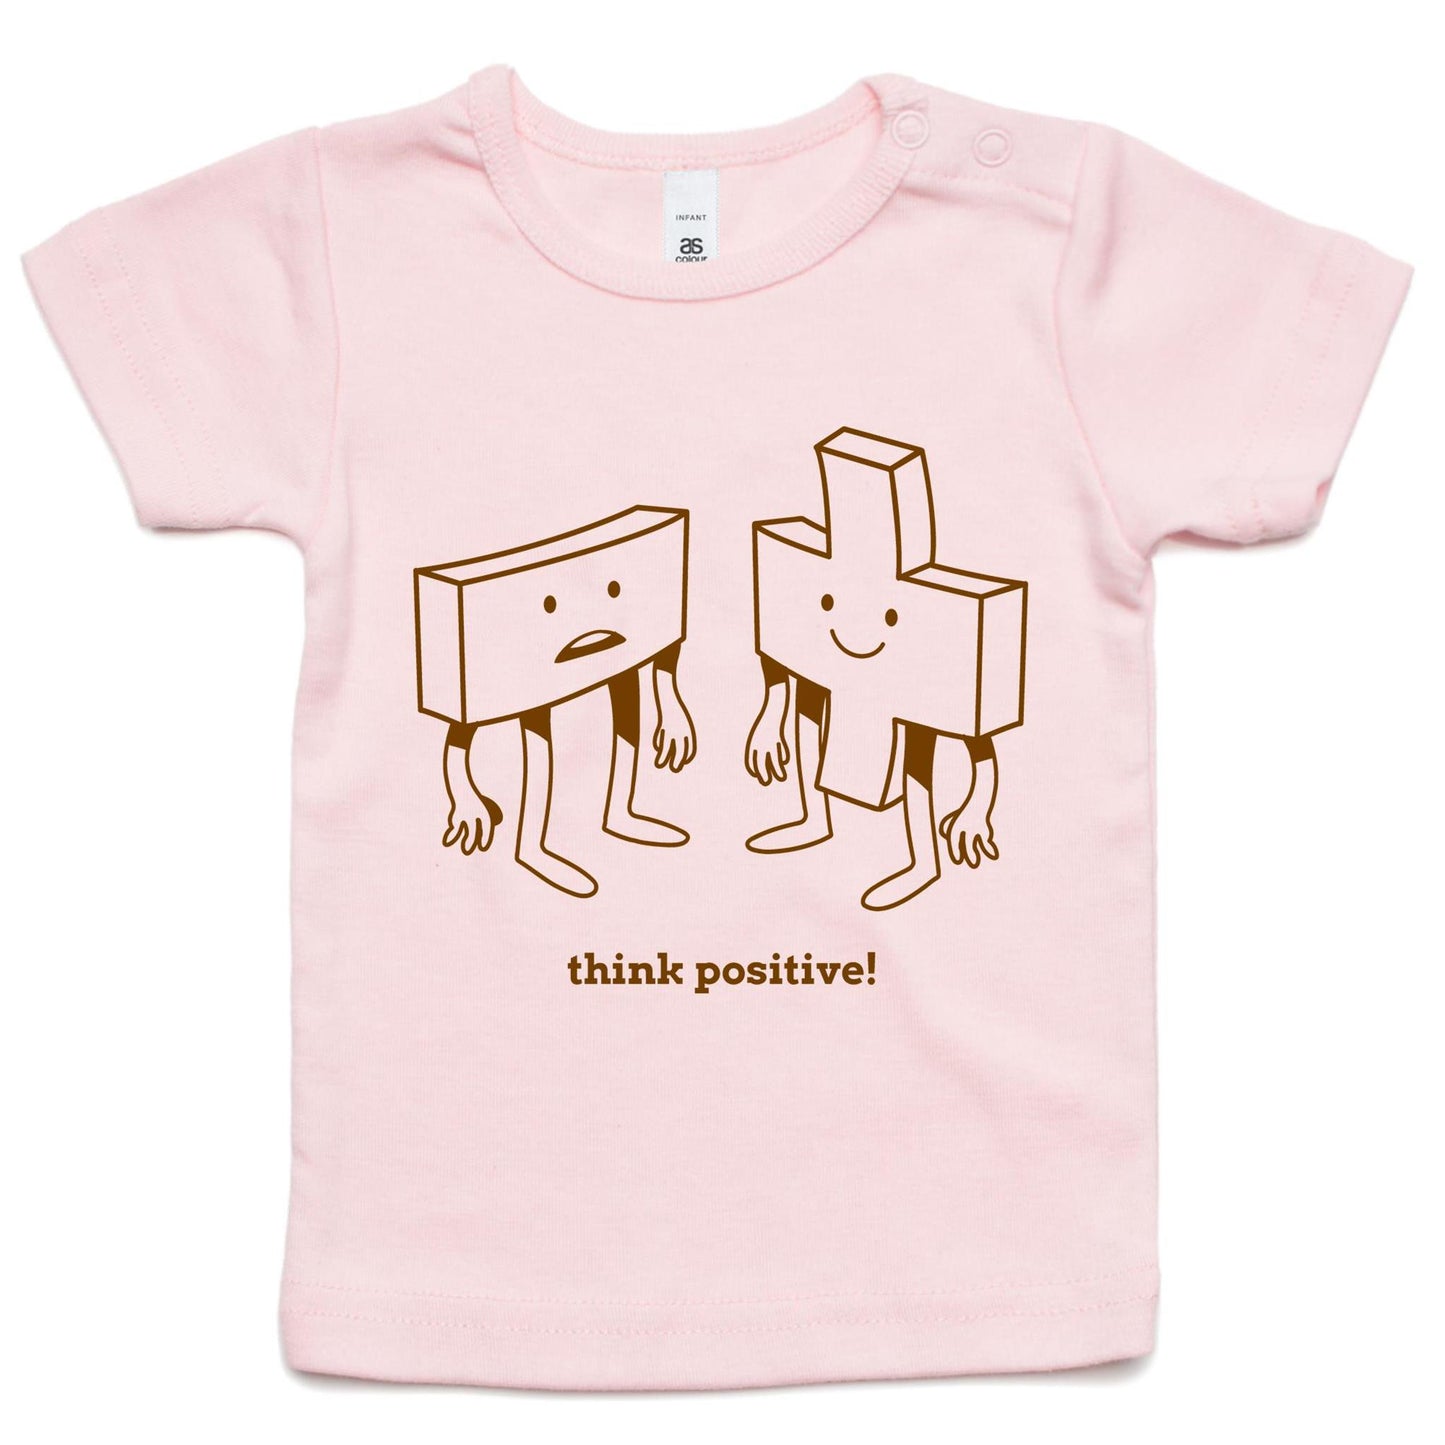 Think Positive, Plus And Minus - Baby T-shirt Pink Baby T-shirt Maths Motivation